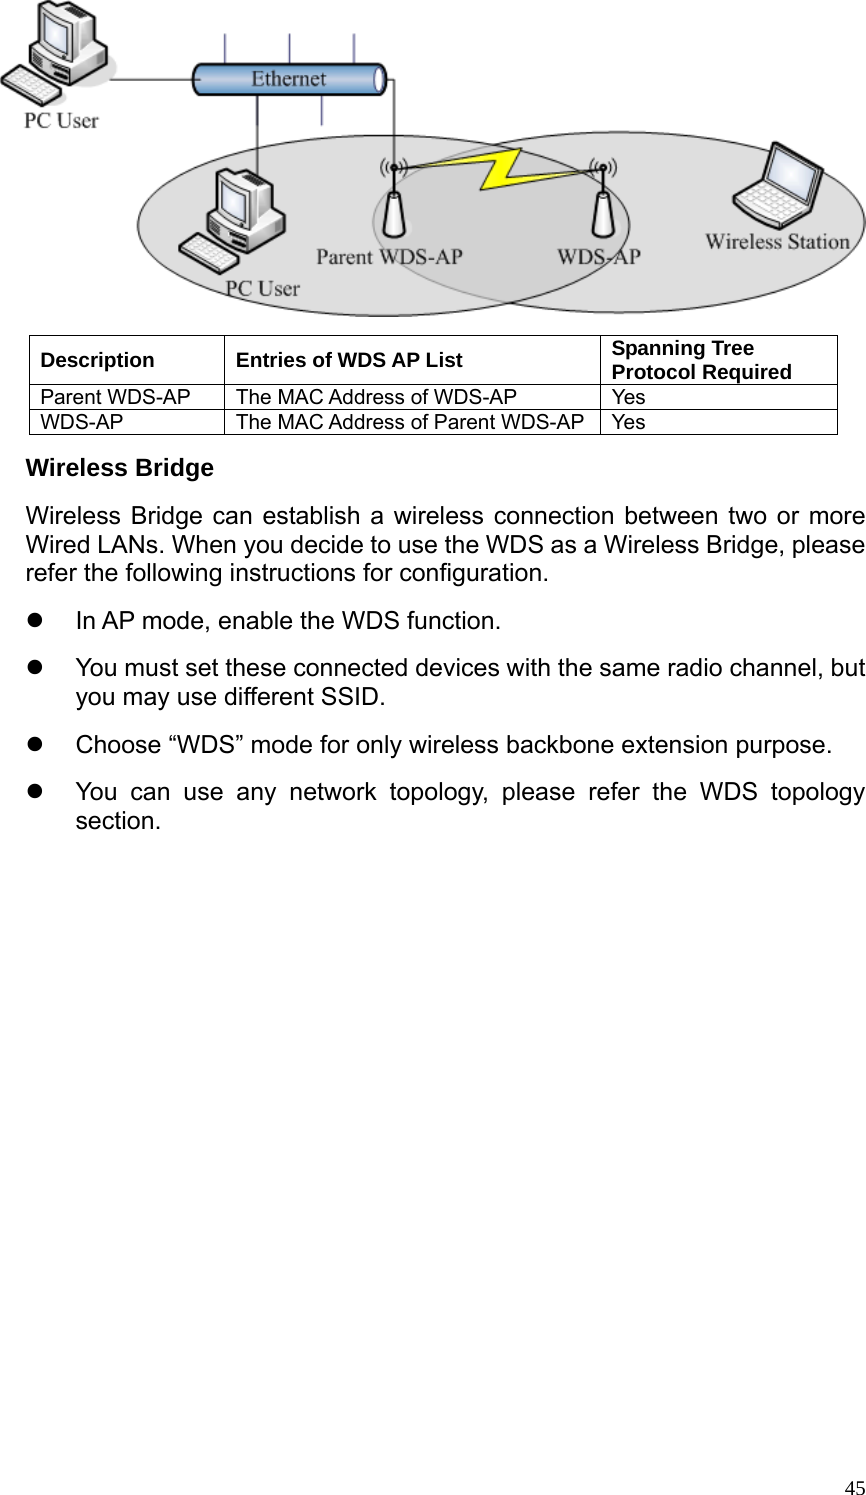  45 Description  Entries of WDS AP List  Spanning Tree Protocol Required Parent WDS-AP  The MAC Address of WDS-AP  Yes WDS-AP The MAC Address of Parent WDS-AP Yes Wireless Bridge Wireless Bridge can establish a wireless connection between two or more Wired LANs. When you decide to use the WDS as a Wireless Bridge, please refer the following instructions for configuration. z  In AP mode, enable the WDS function. z  You must set these connected devices with the same radio channel, but you may use different SSID. z  Choose “WDS” mode for only wireless backbone extension purpose. z  You can use any network topology, please refer the WDS topology section.            